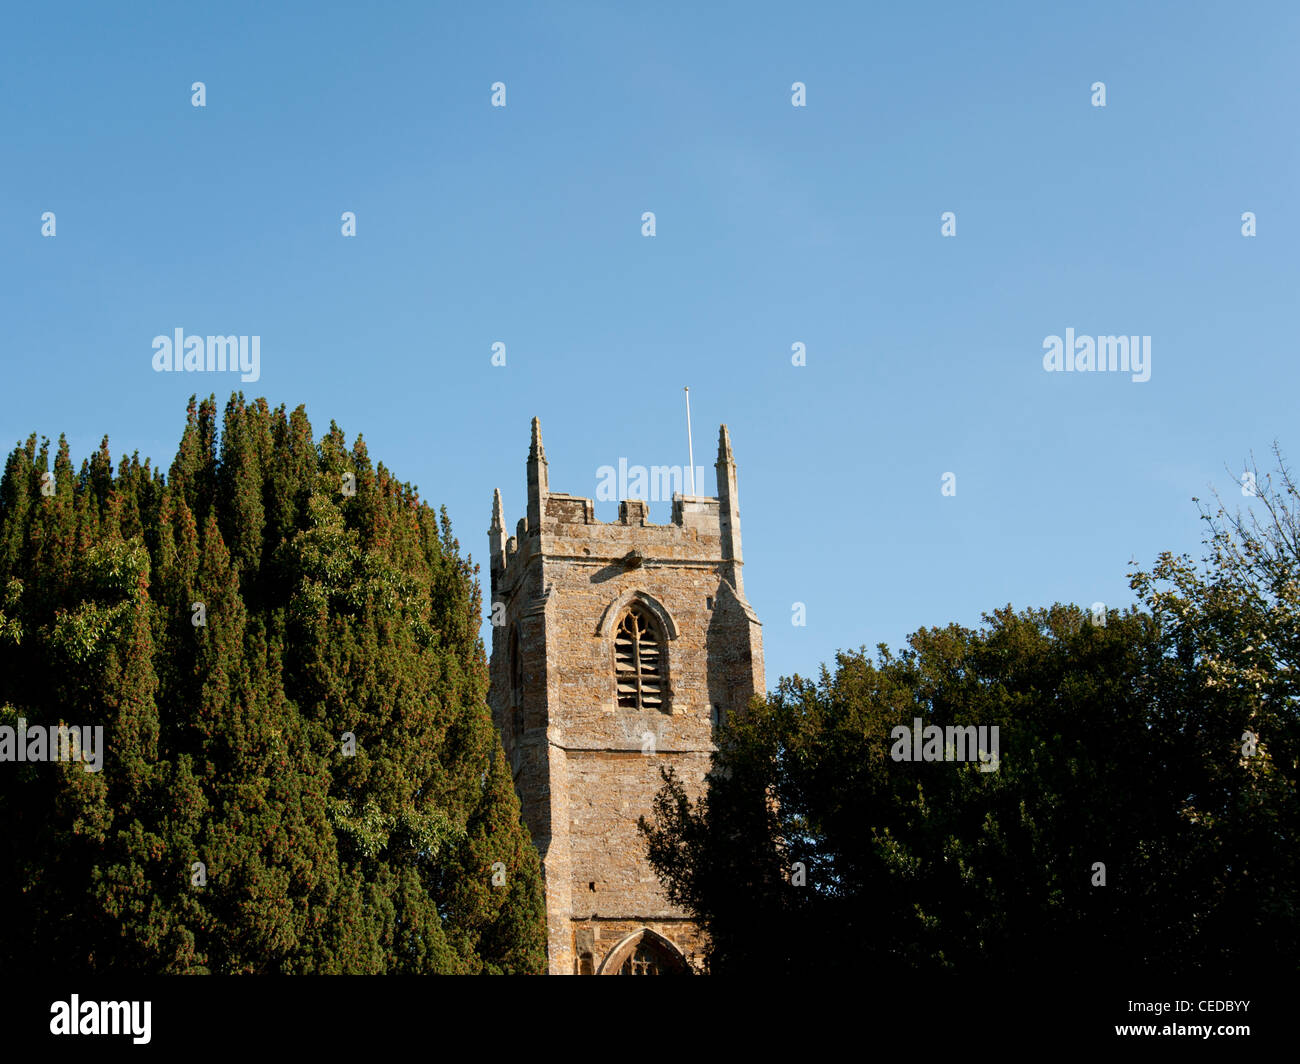 St. Peter and St. Paul's Church, Chipping Warden, Northamptonshire, England, UK Stock Photo